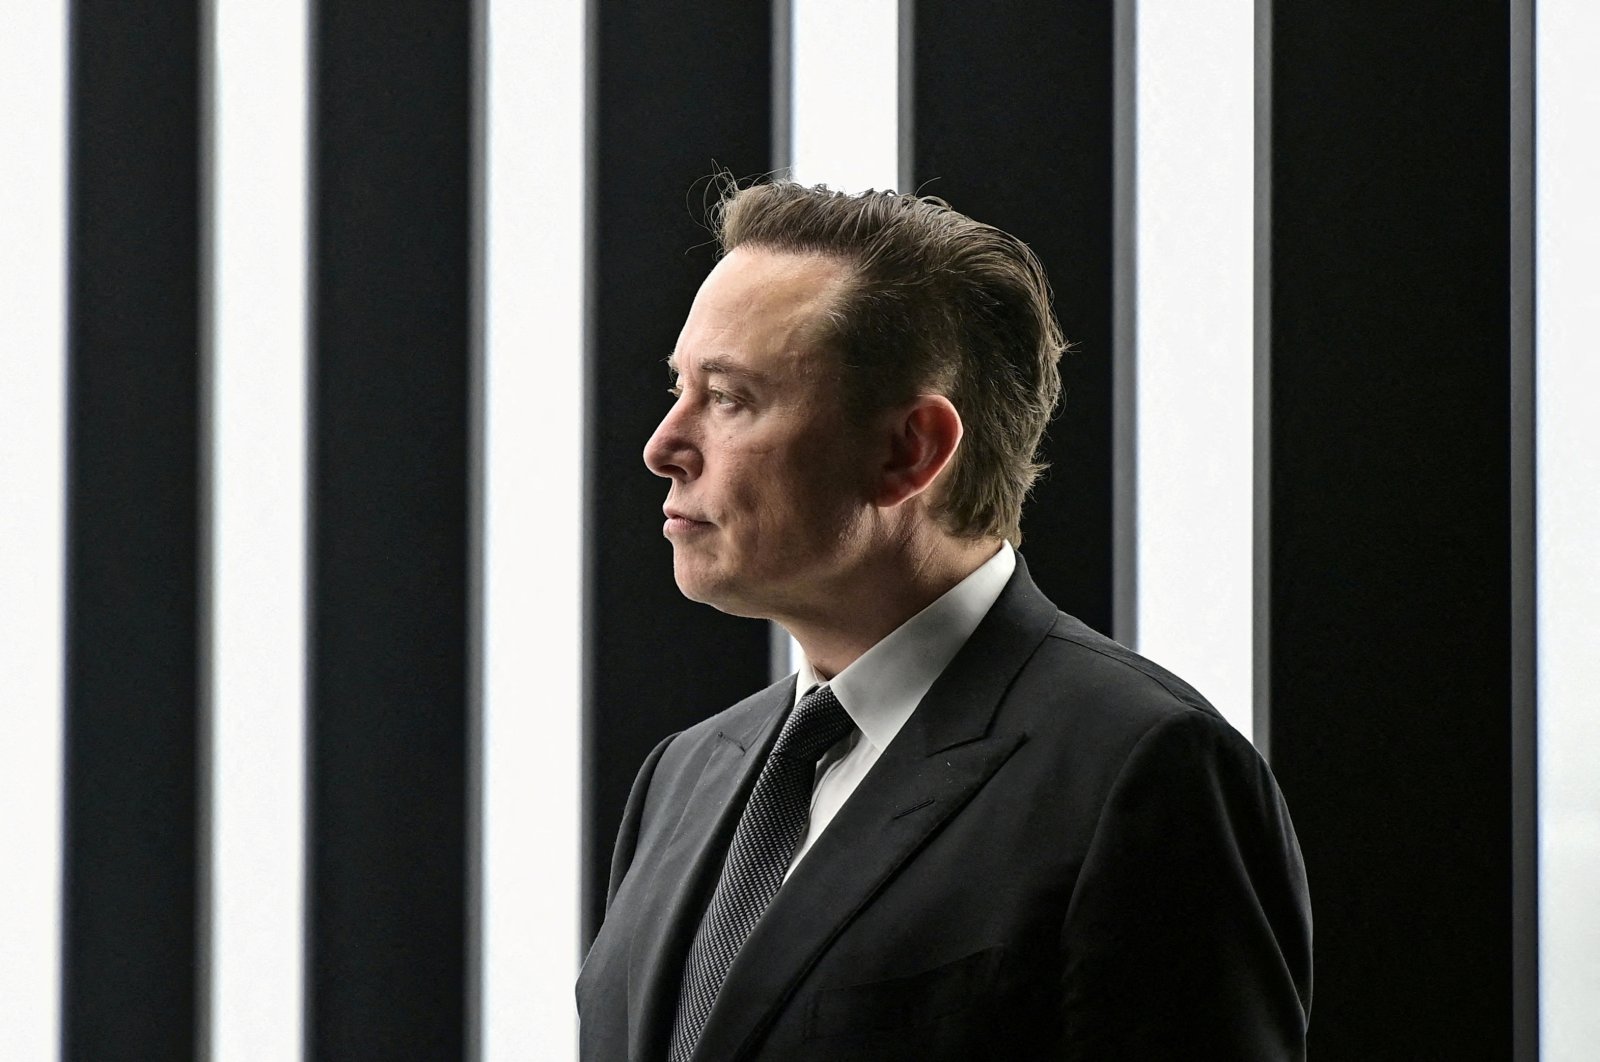 Elon Musk attends the opening ceremony of the new Tesla Gigafactory in Gruenheide, Germany, March 22, 2022. (Reuters Photo)